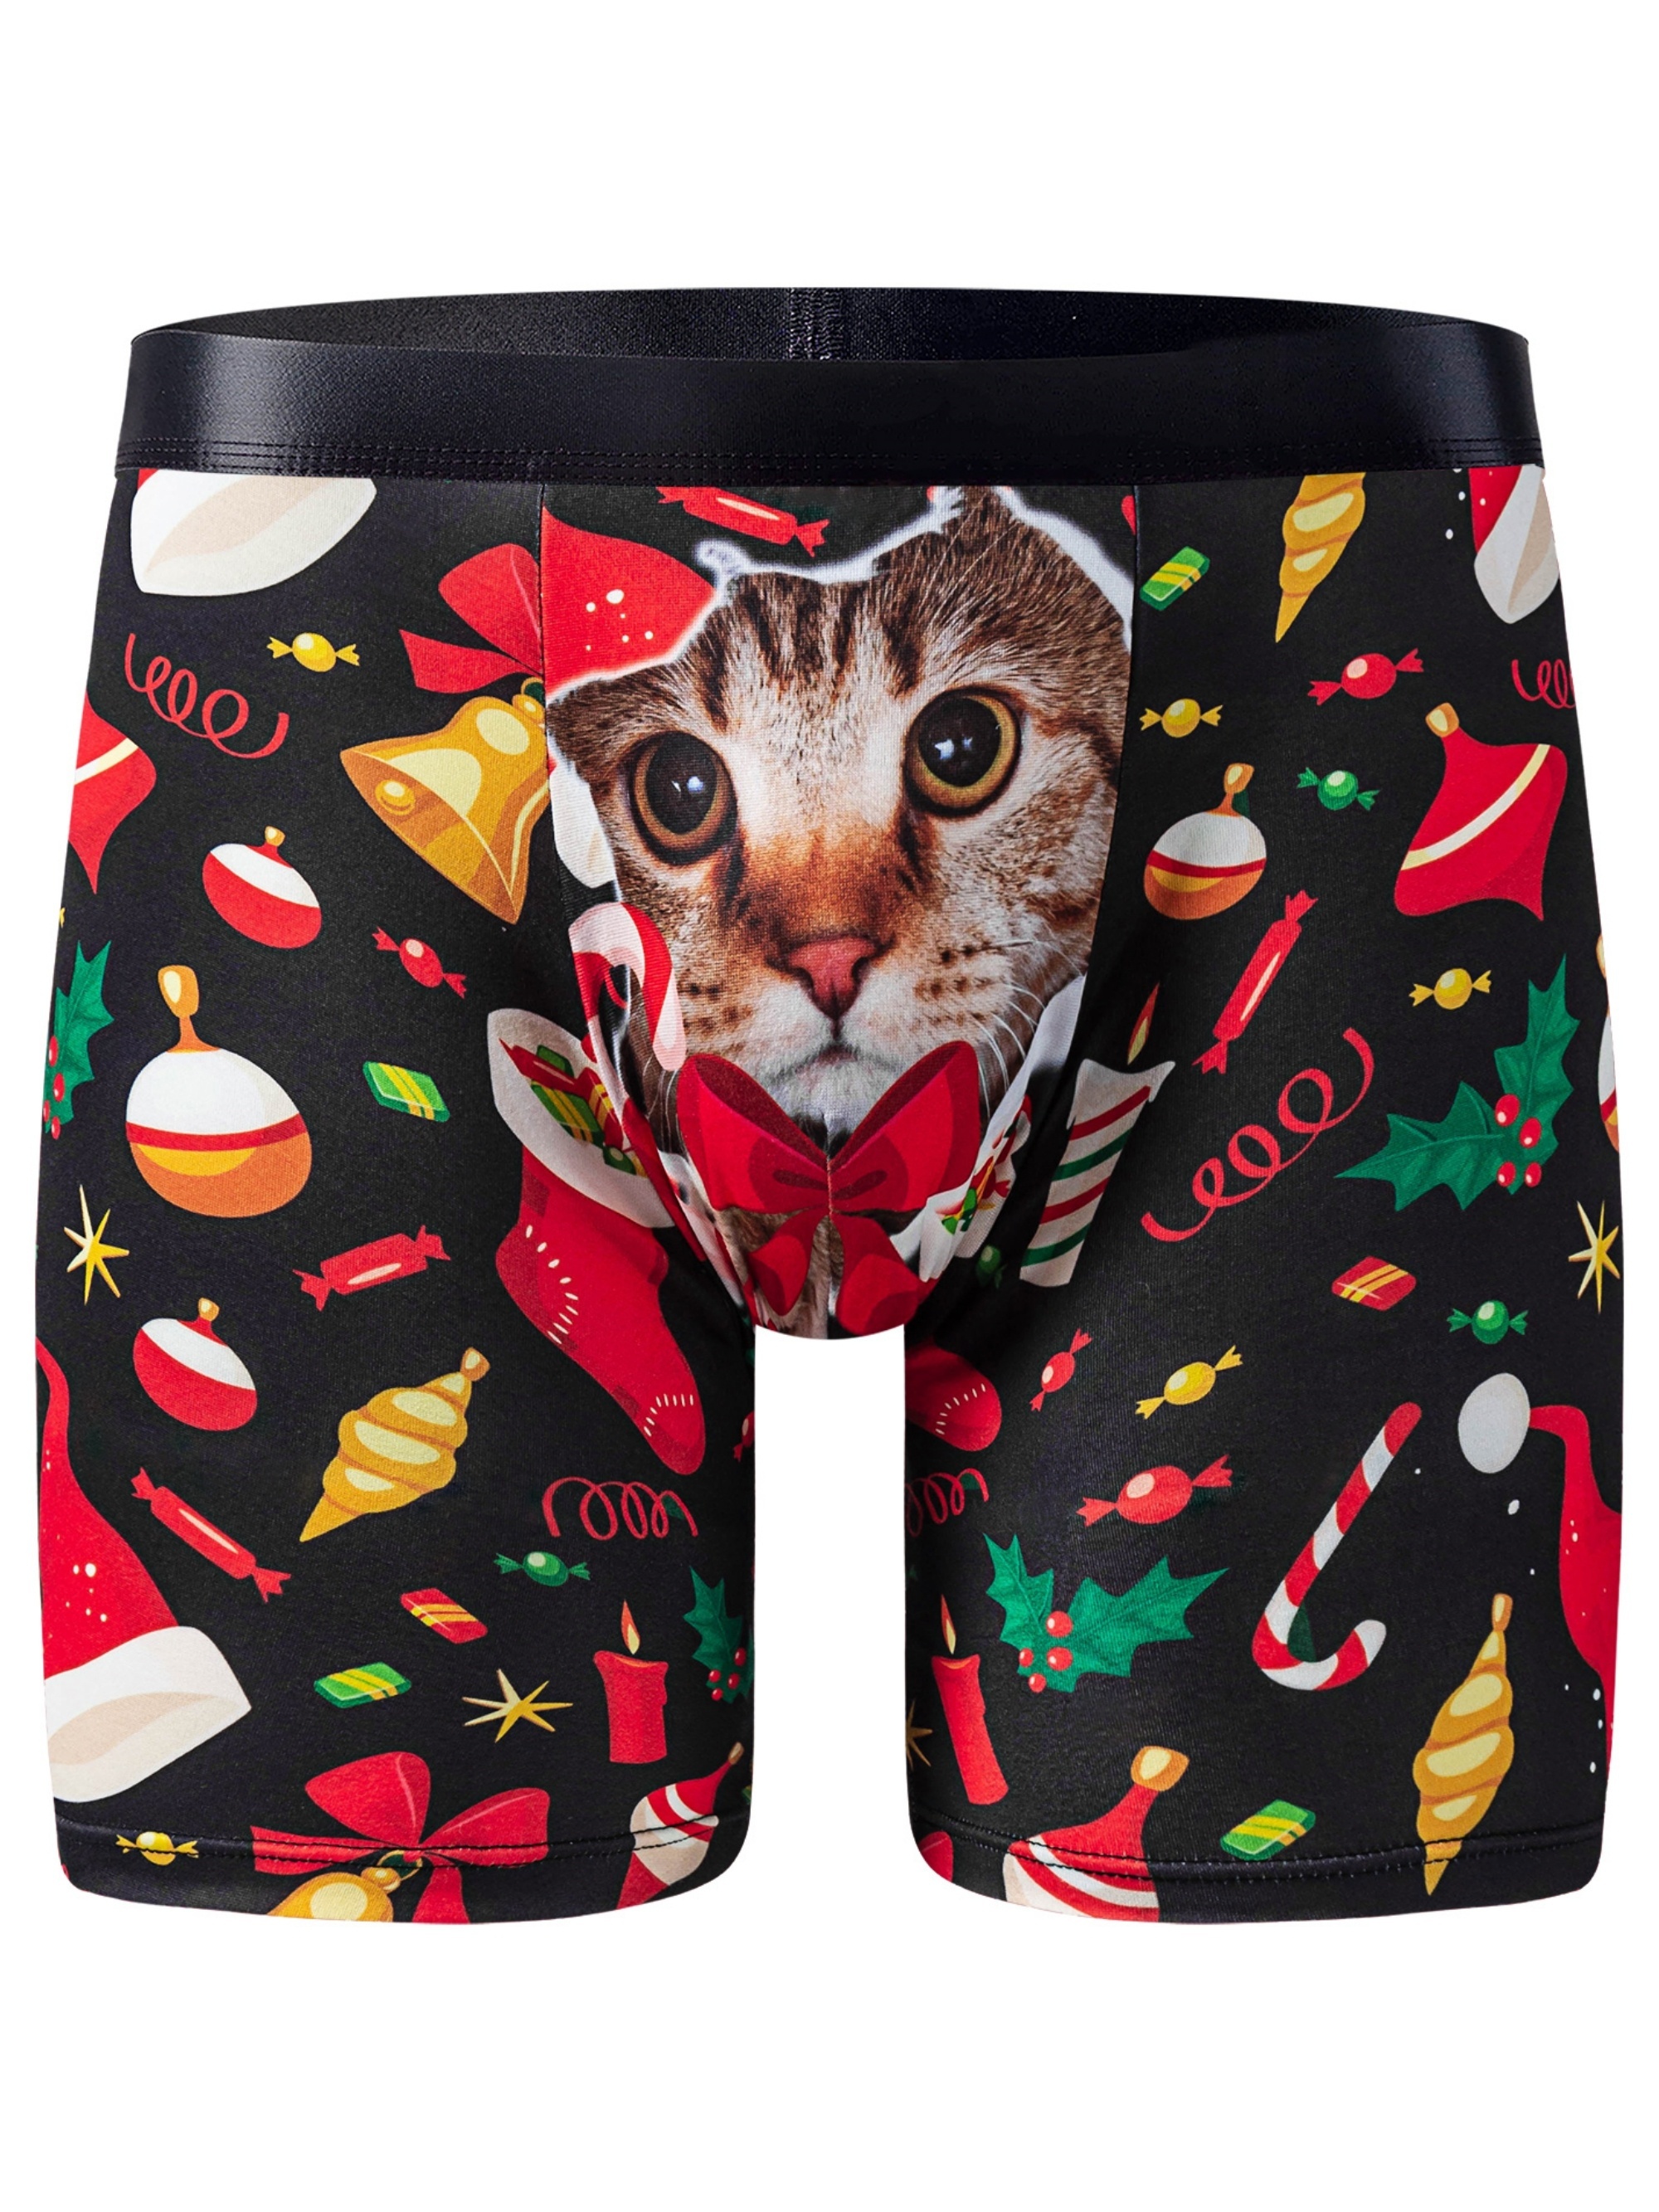 Man Funny Cat Boxer Briefs Shorts Panties Polyester Underwear Cute